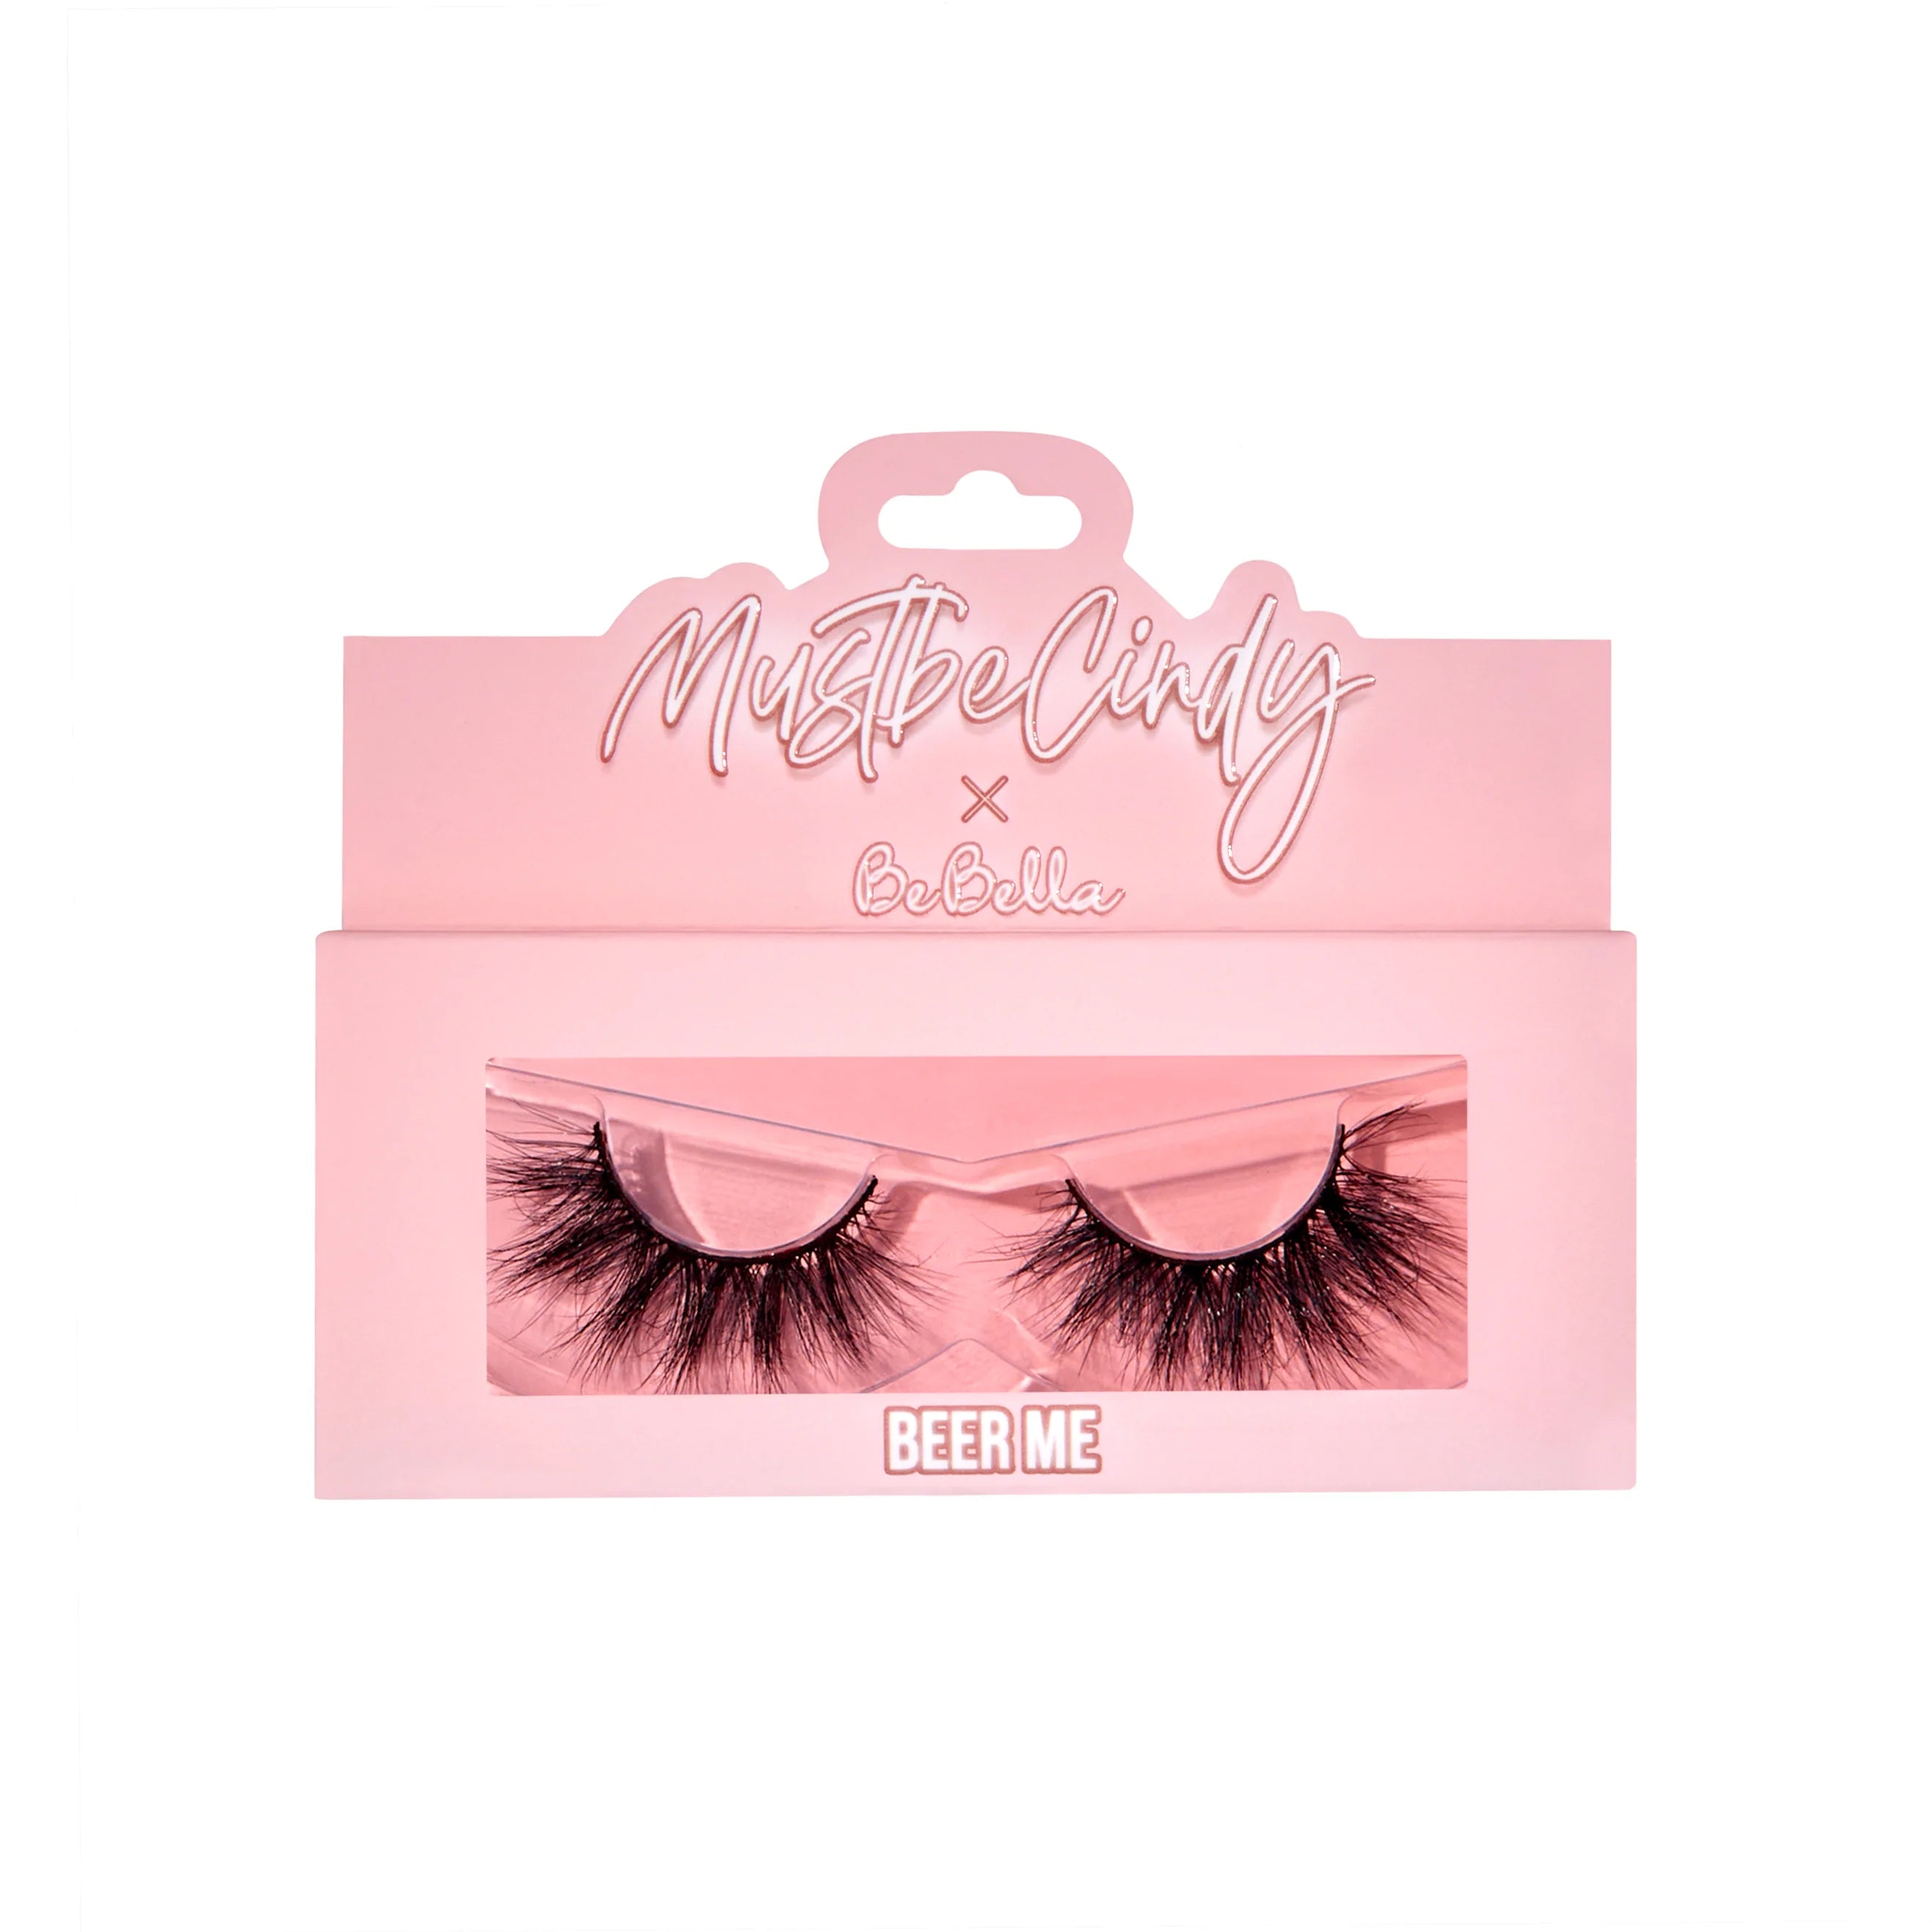 BB-6.22-Ecomm-Must-Be-Cindy-x-Be-Bella-Beer-Me-Lashes_2638x_2abcb70d-99ce-41e2-af79-e5ca30e33923.webp